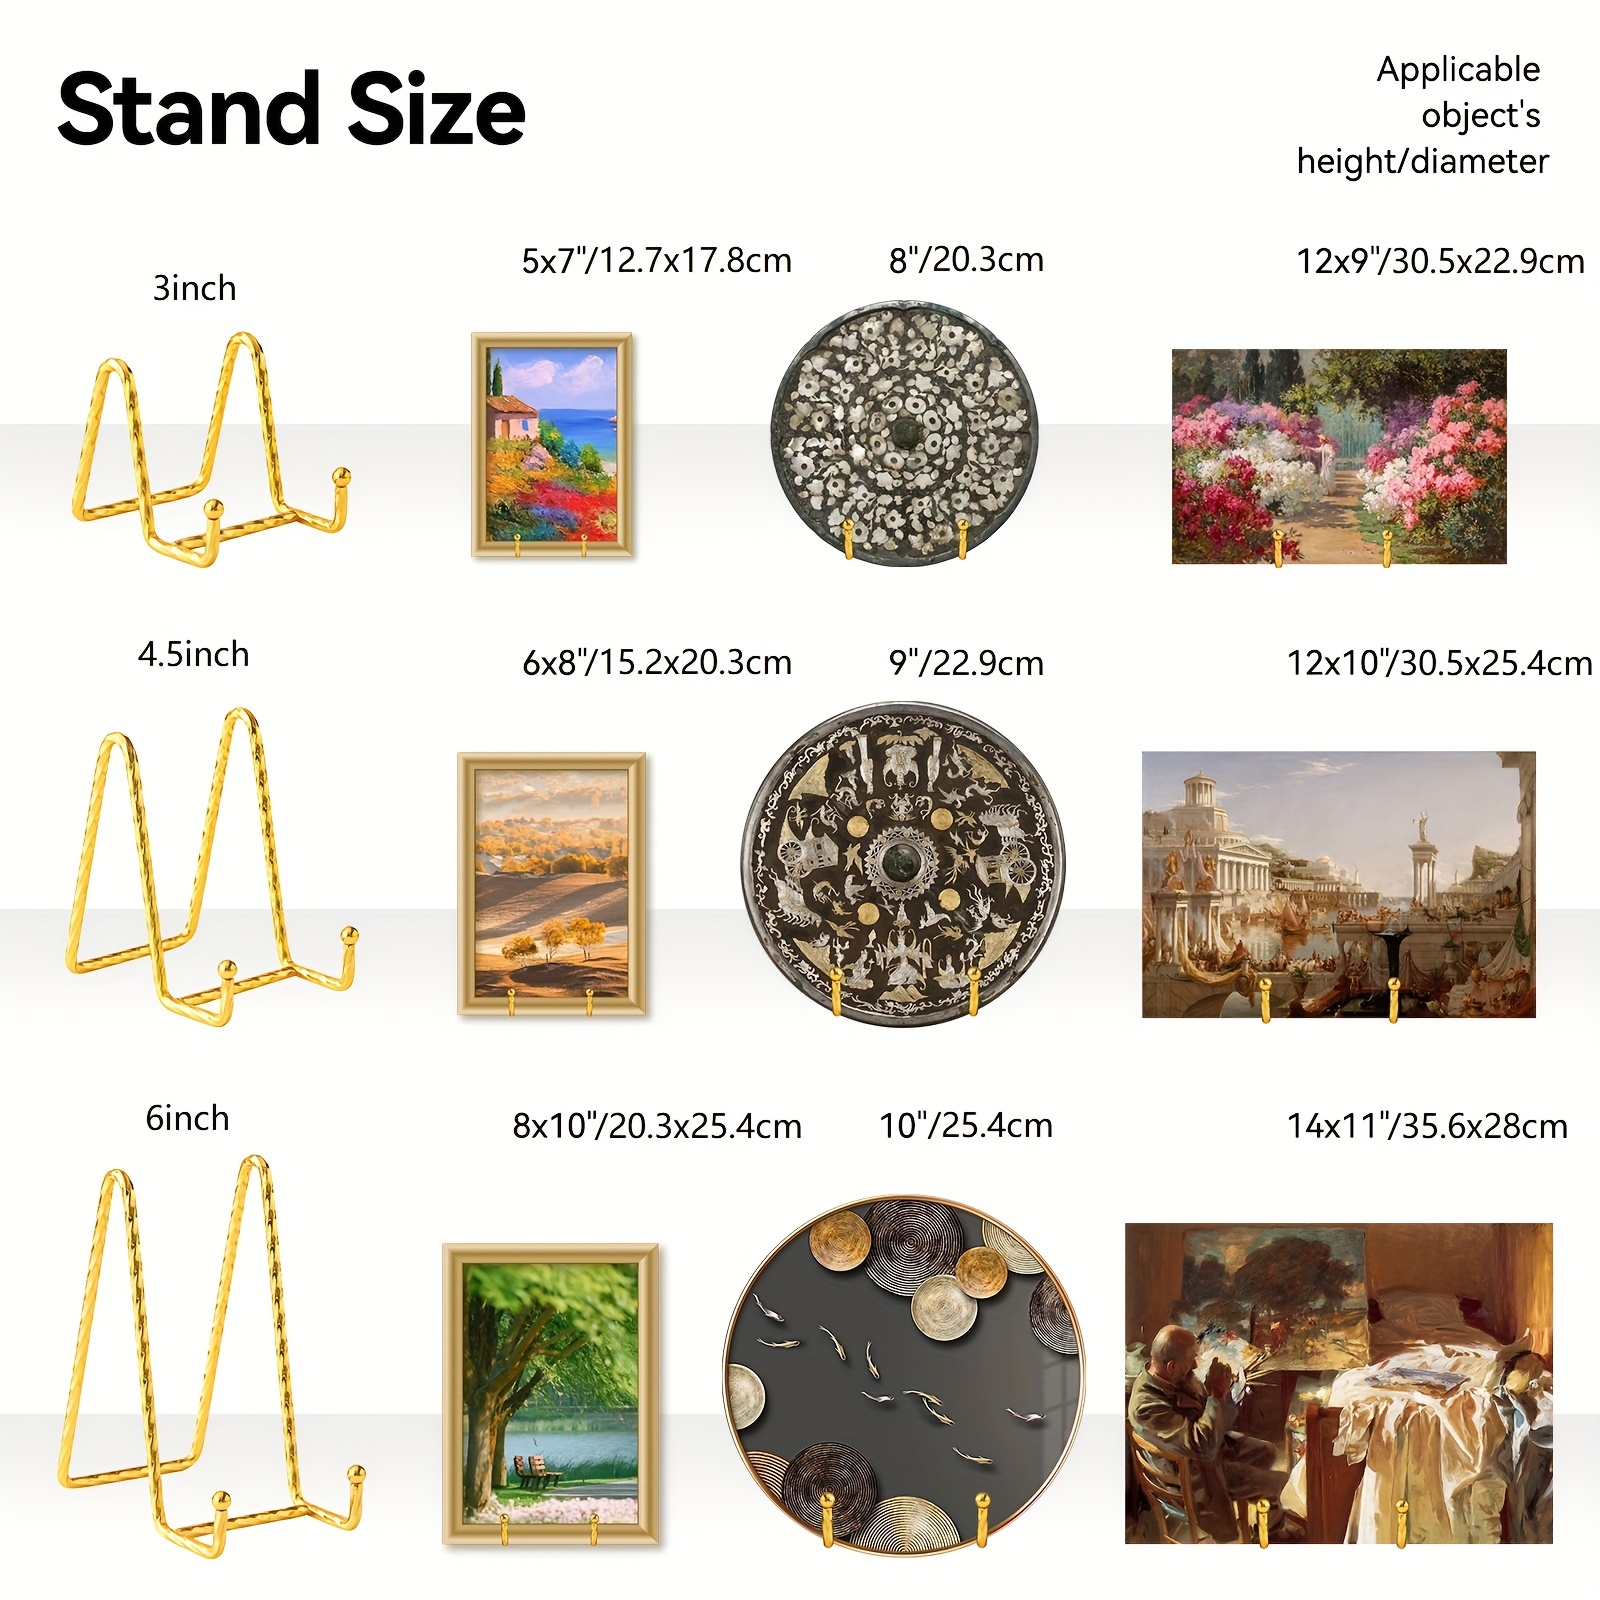 Plate Stands for Display - older Stand + Metal Frame holder stand Picture,  Decorative Plate, Book, Photo Easel,GoldSmall 